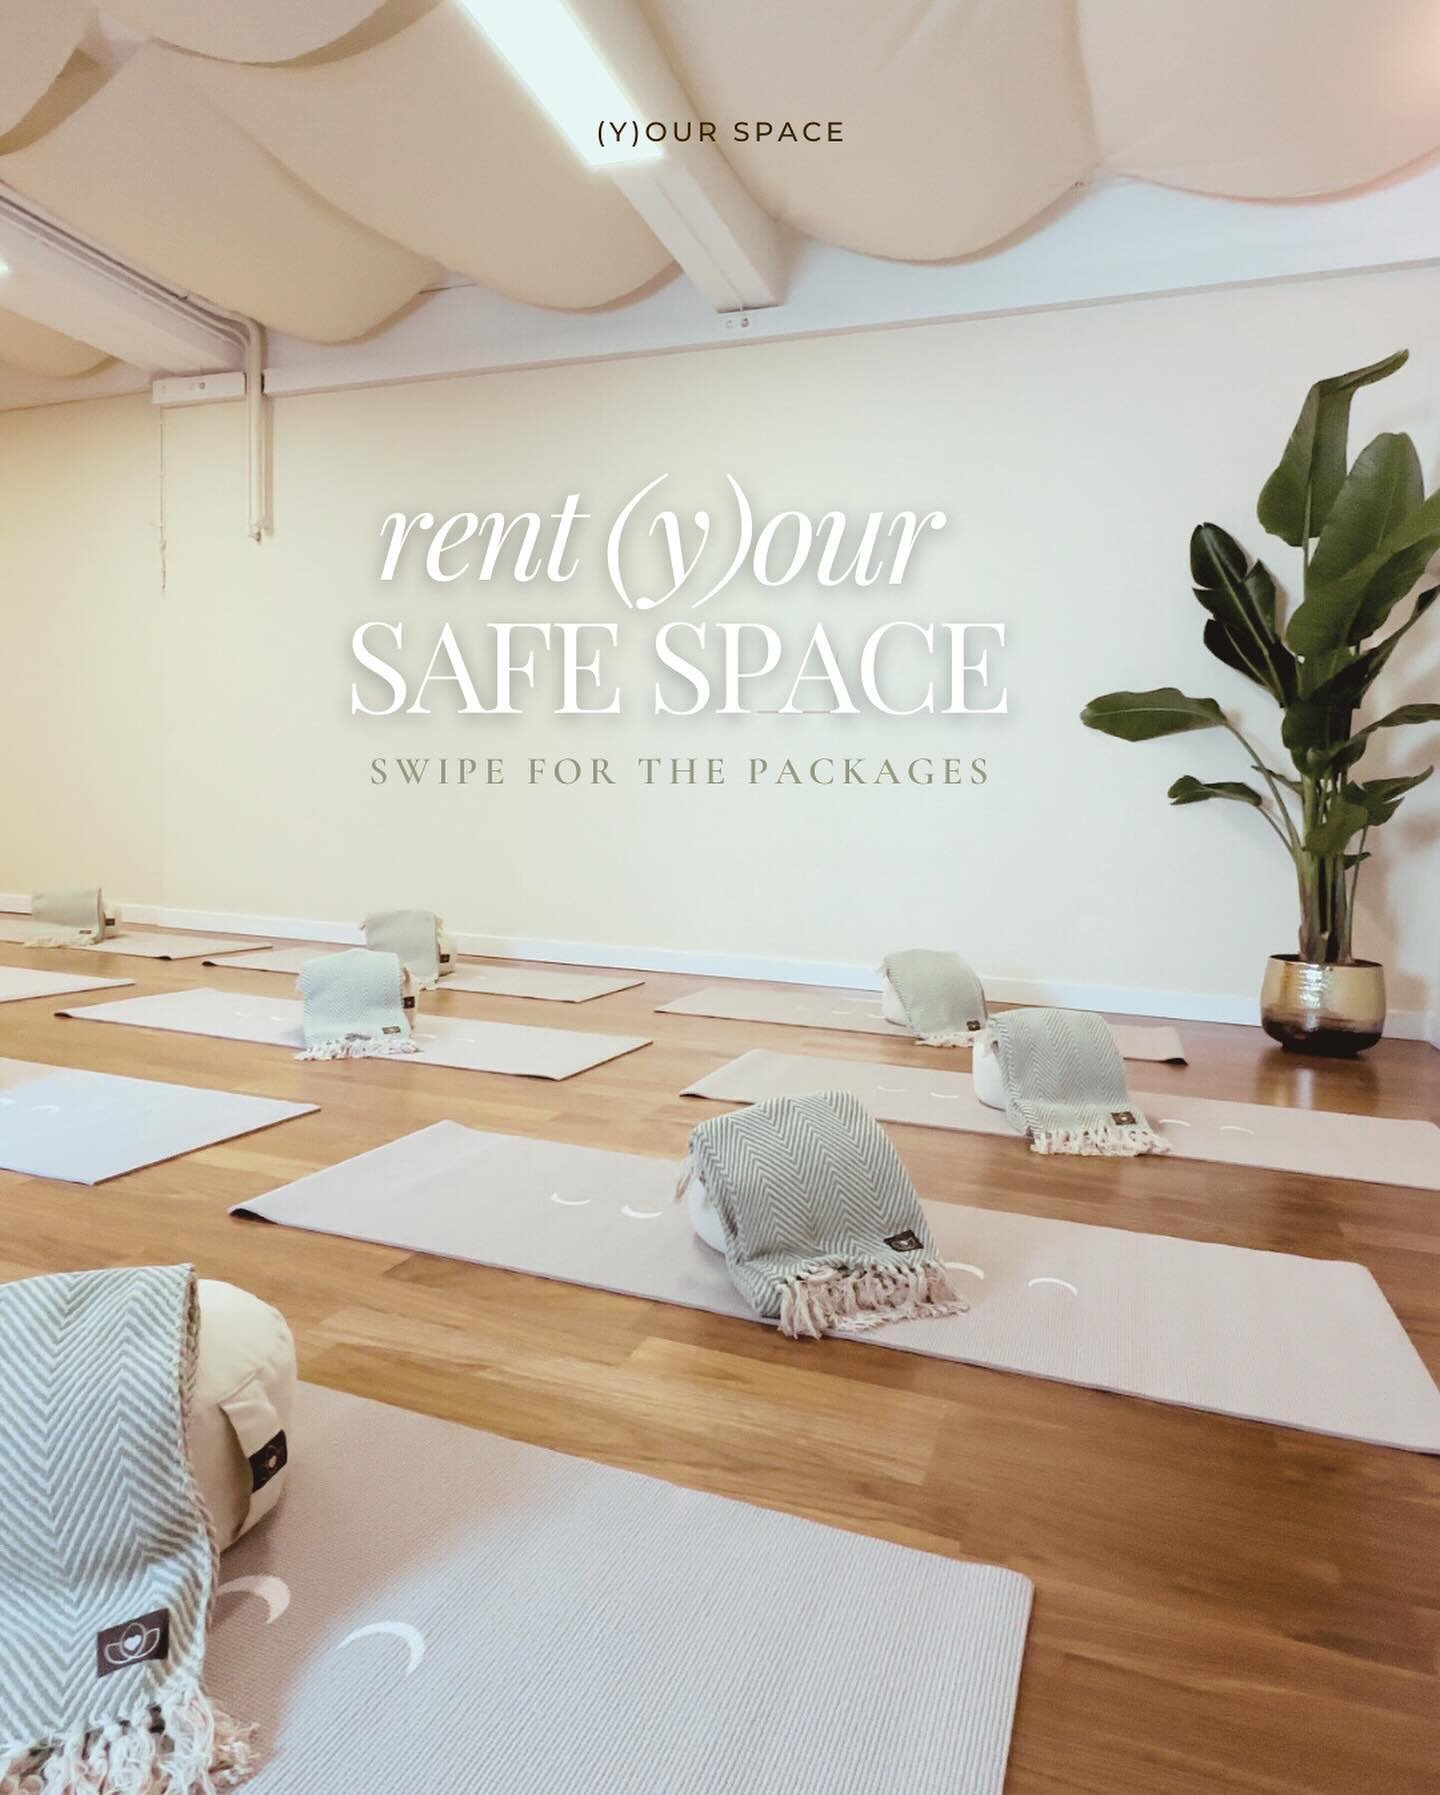 Big news! 

Our Atelier Zen is now open for your workshops, ceremonies, or one-day retreats! 

Imagine a space bathed in light, brimming with zen vibes, and nestled in nature's embrace &ndash; that's Atelier Zen for you. 🧘&zwj;♀️

Why you'll love it